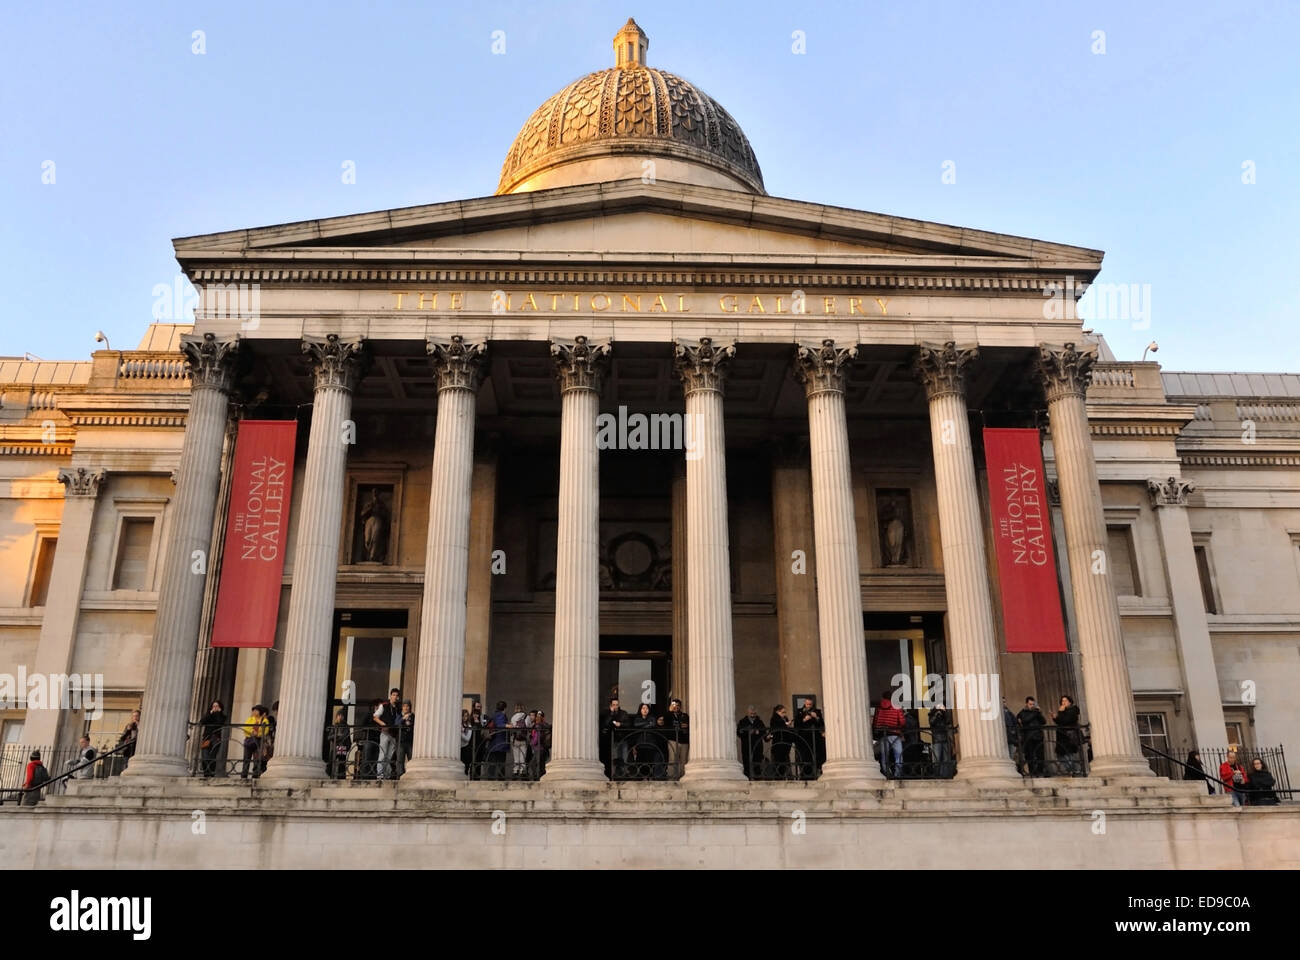 Exterior entrance to the National Portrait Gallery, Trafalgar Square, Westminster, London, UK - winter Stock Photo